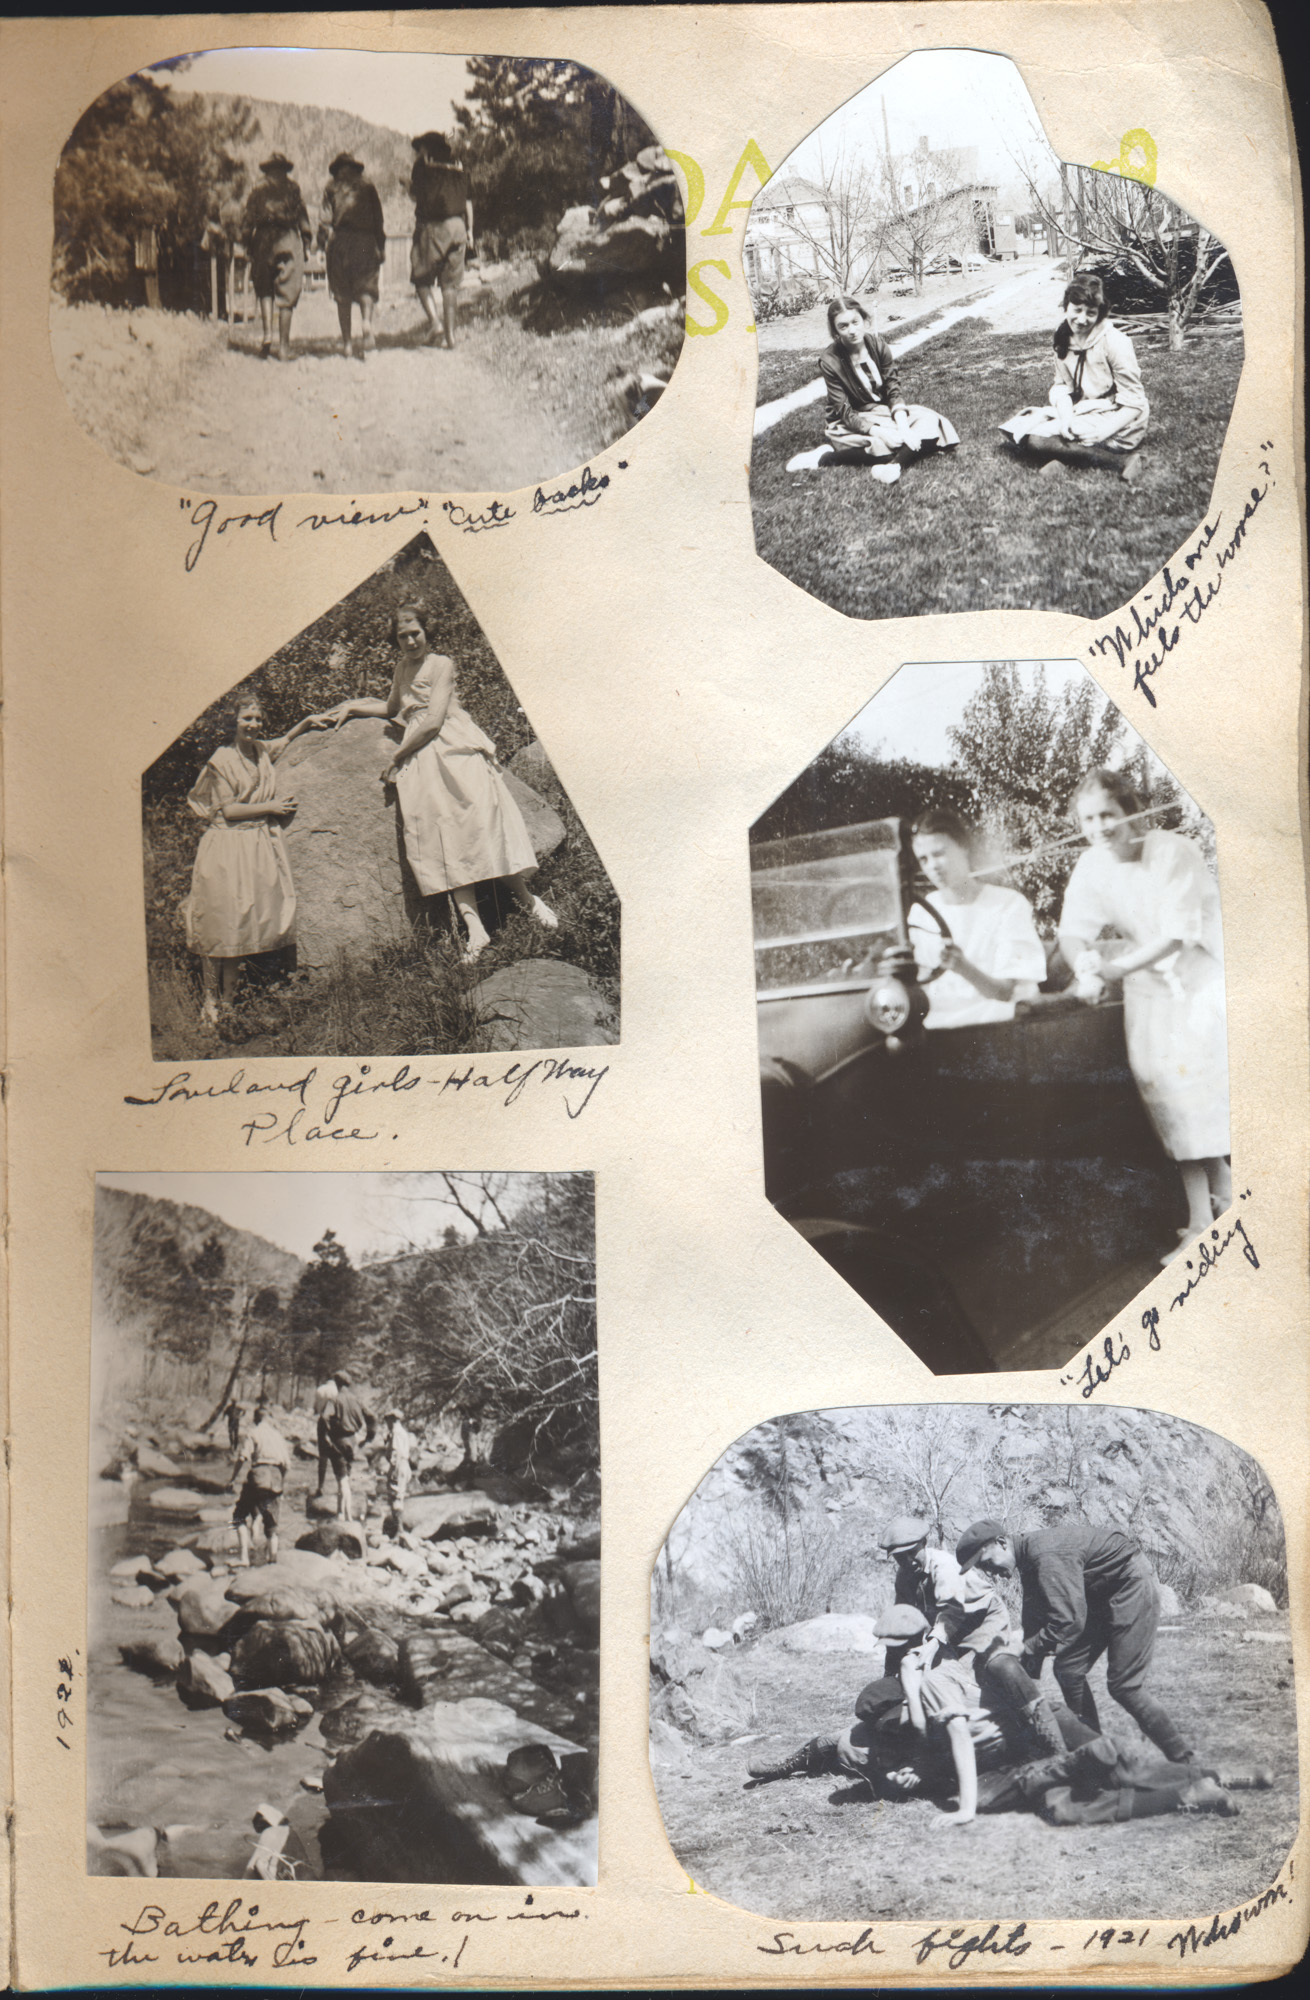 Dauth Family Archive - Circa 1921-1924 - Elizabeth Dauth's Memory Book - Page 149 - Idlewi